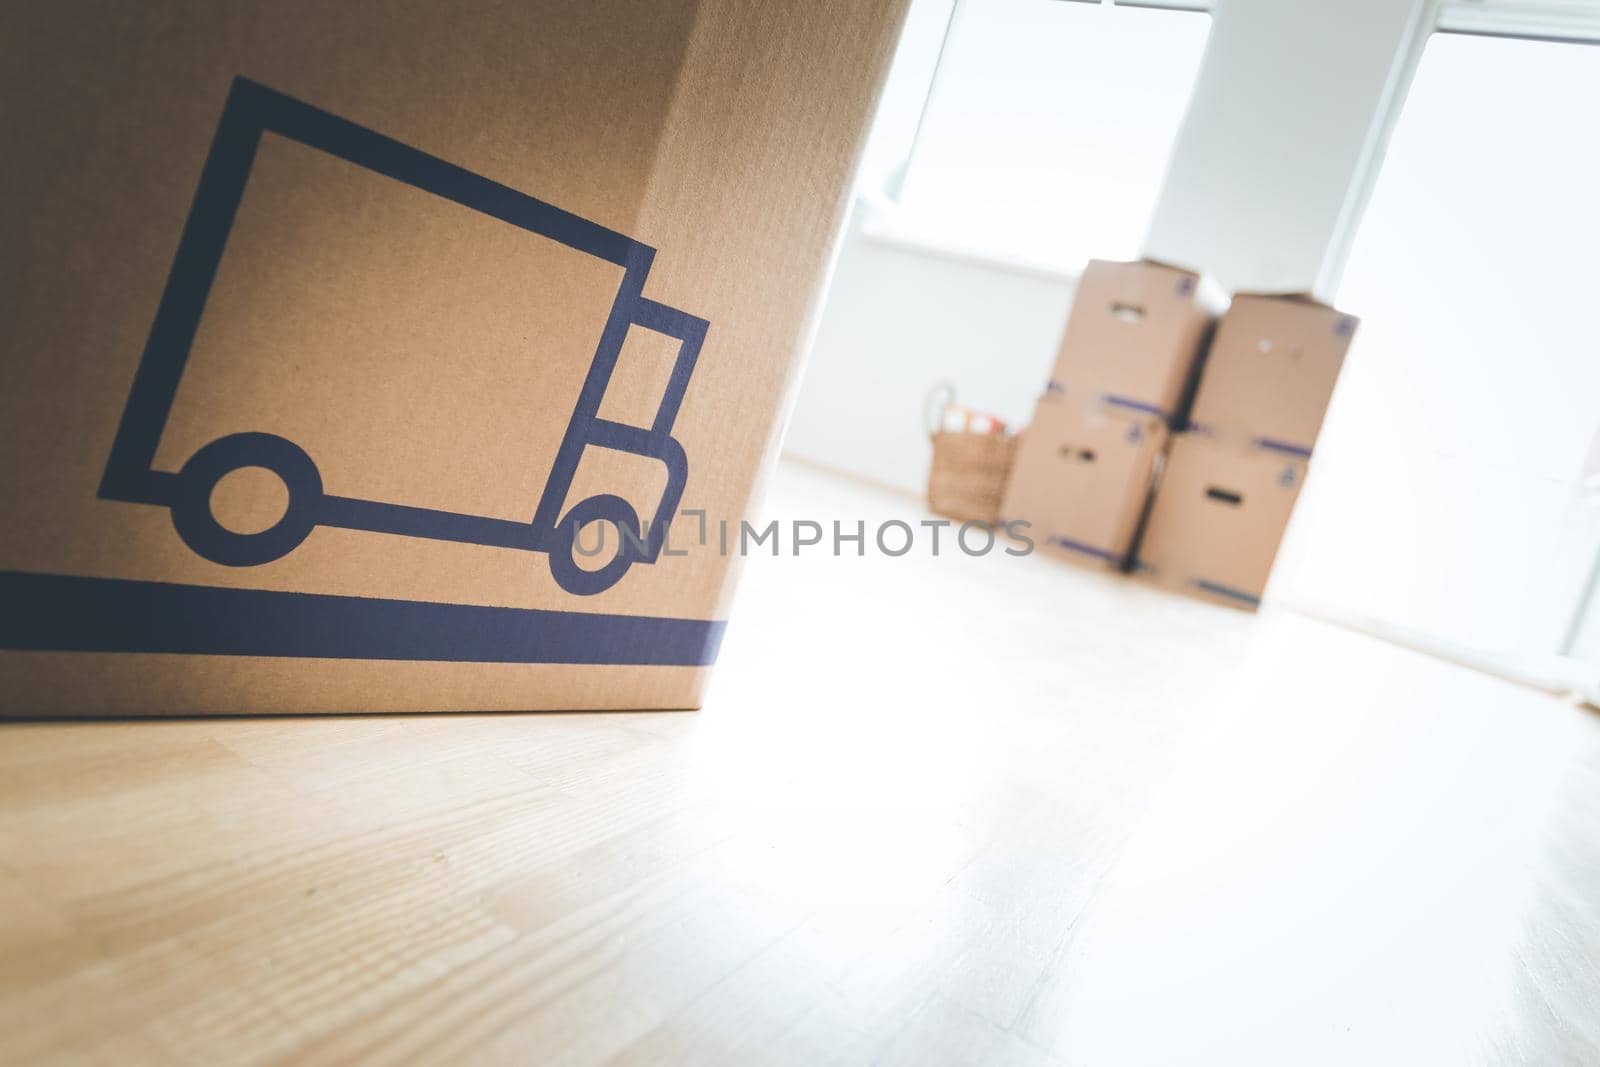 Move. Cardboard, boxes for moving into a new, clean and bright home by Daxenbichler